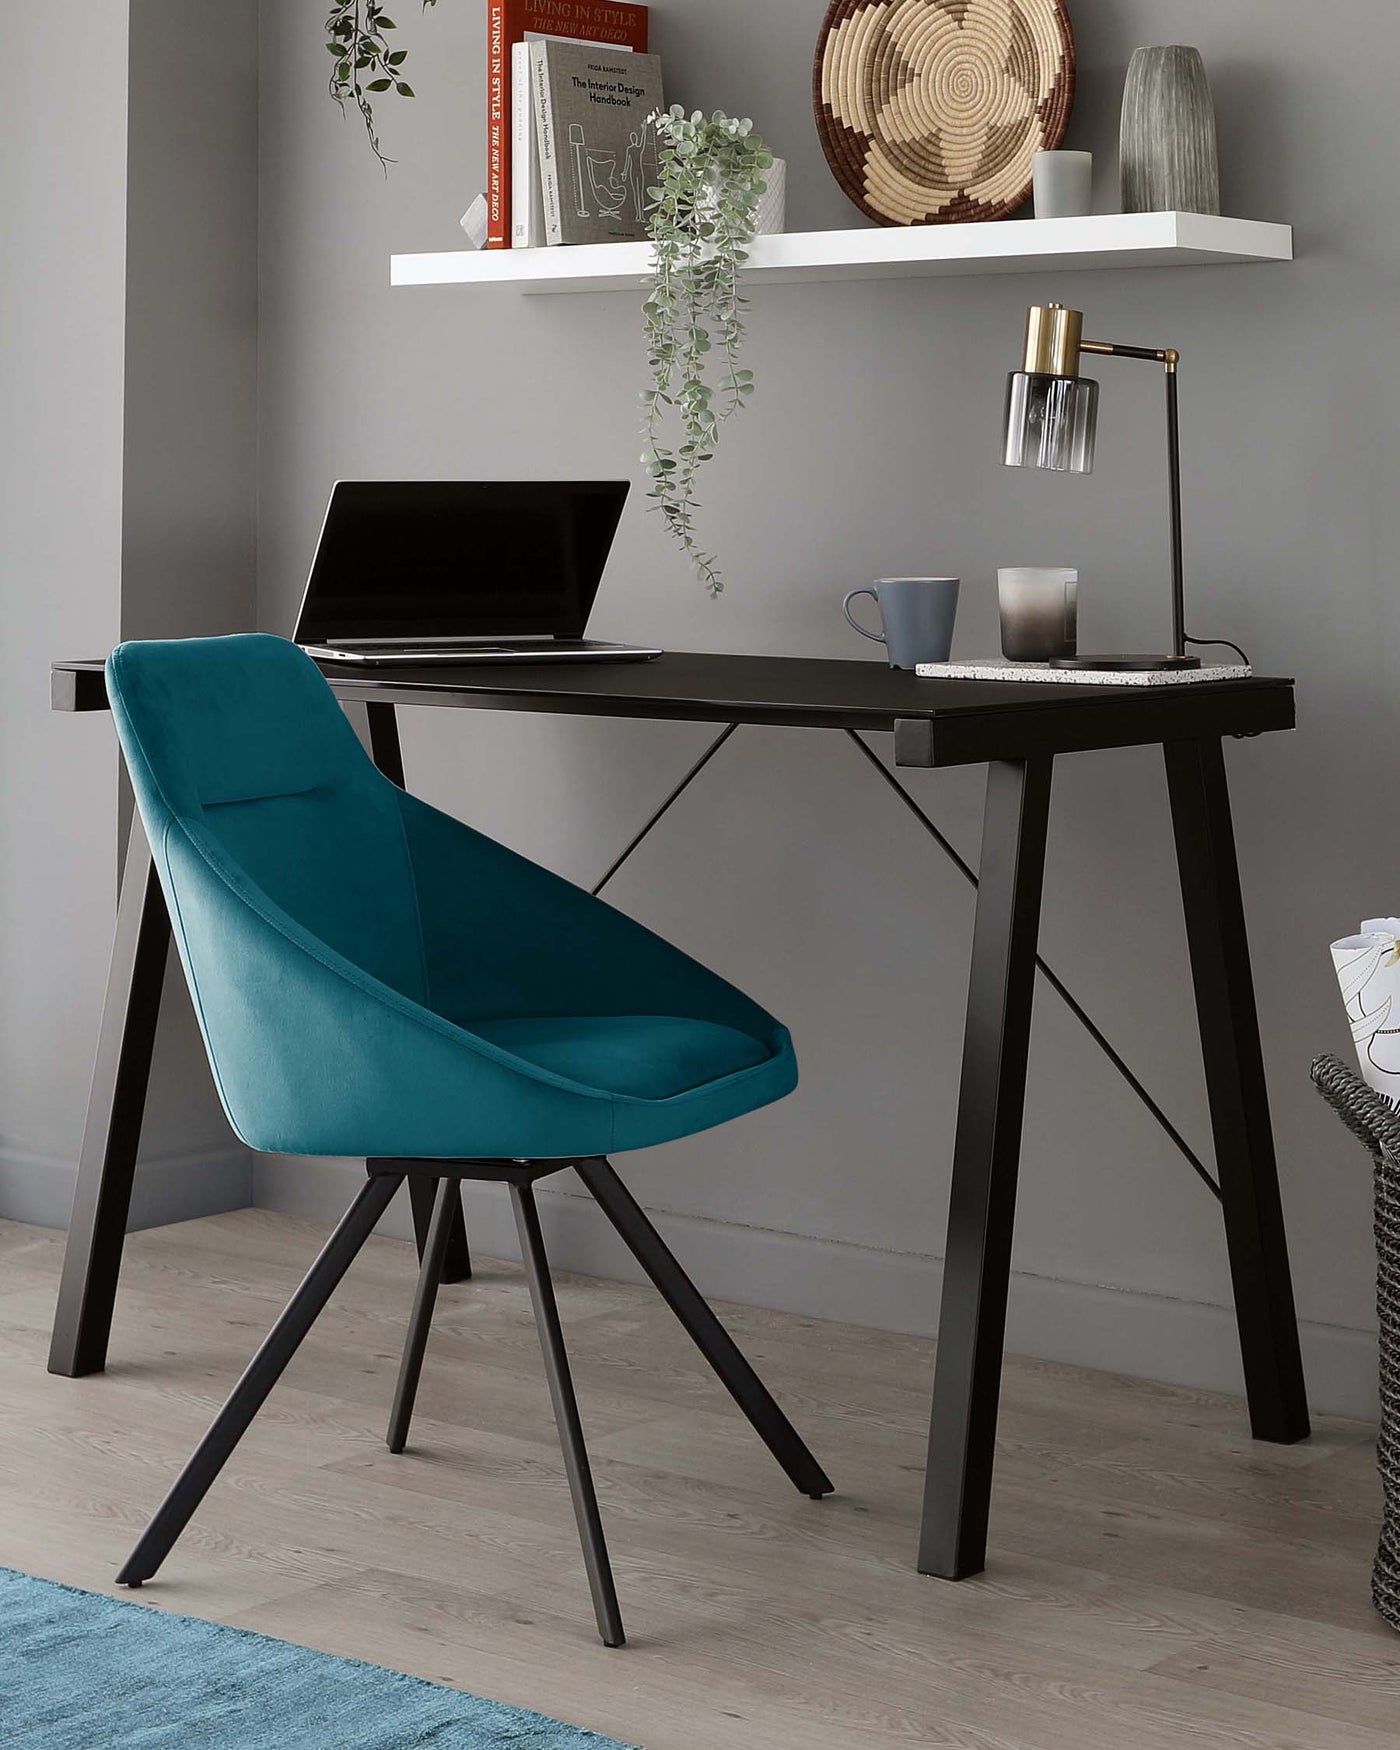 A modern workspace featuring a sleek black desk with A-framed legs and a smooth surface, paired with a plush teal upholstered chair with a curved backrest and angled black legs. The desk is accessorized with an elegant brass desk lamp, a laptop, and a few cups, suggesting a functional yet stylish office setting.